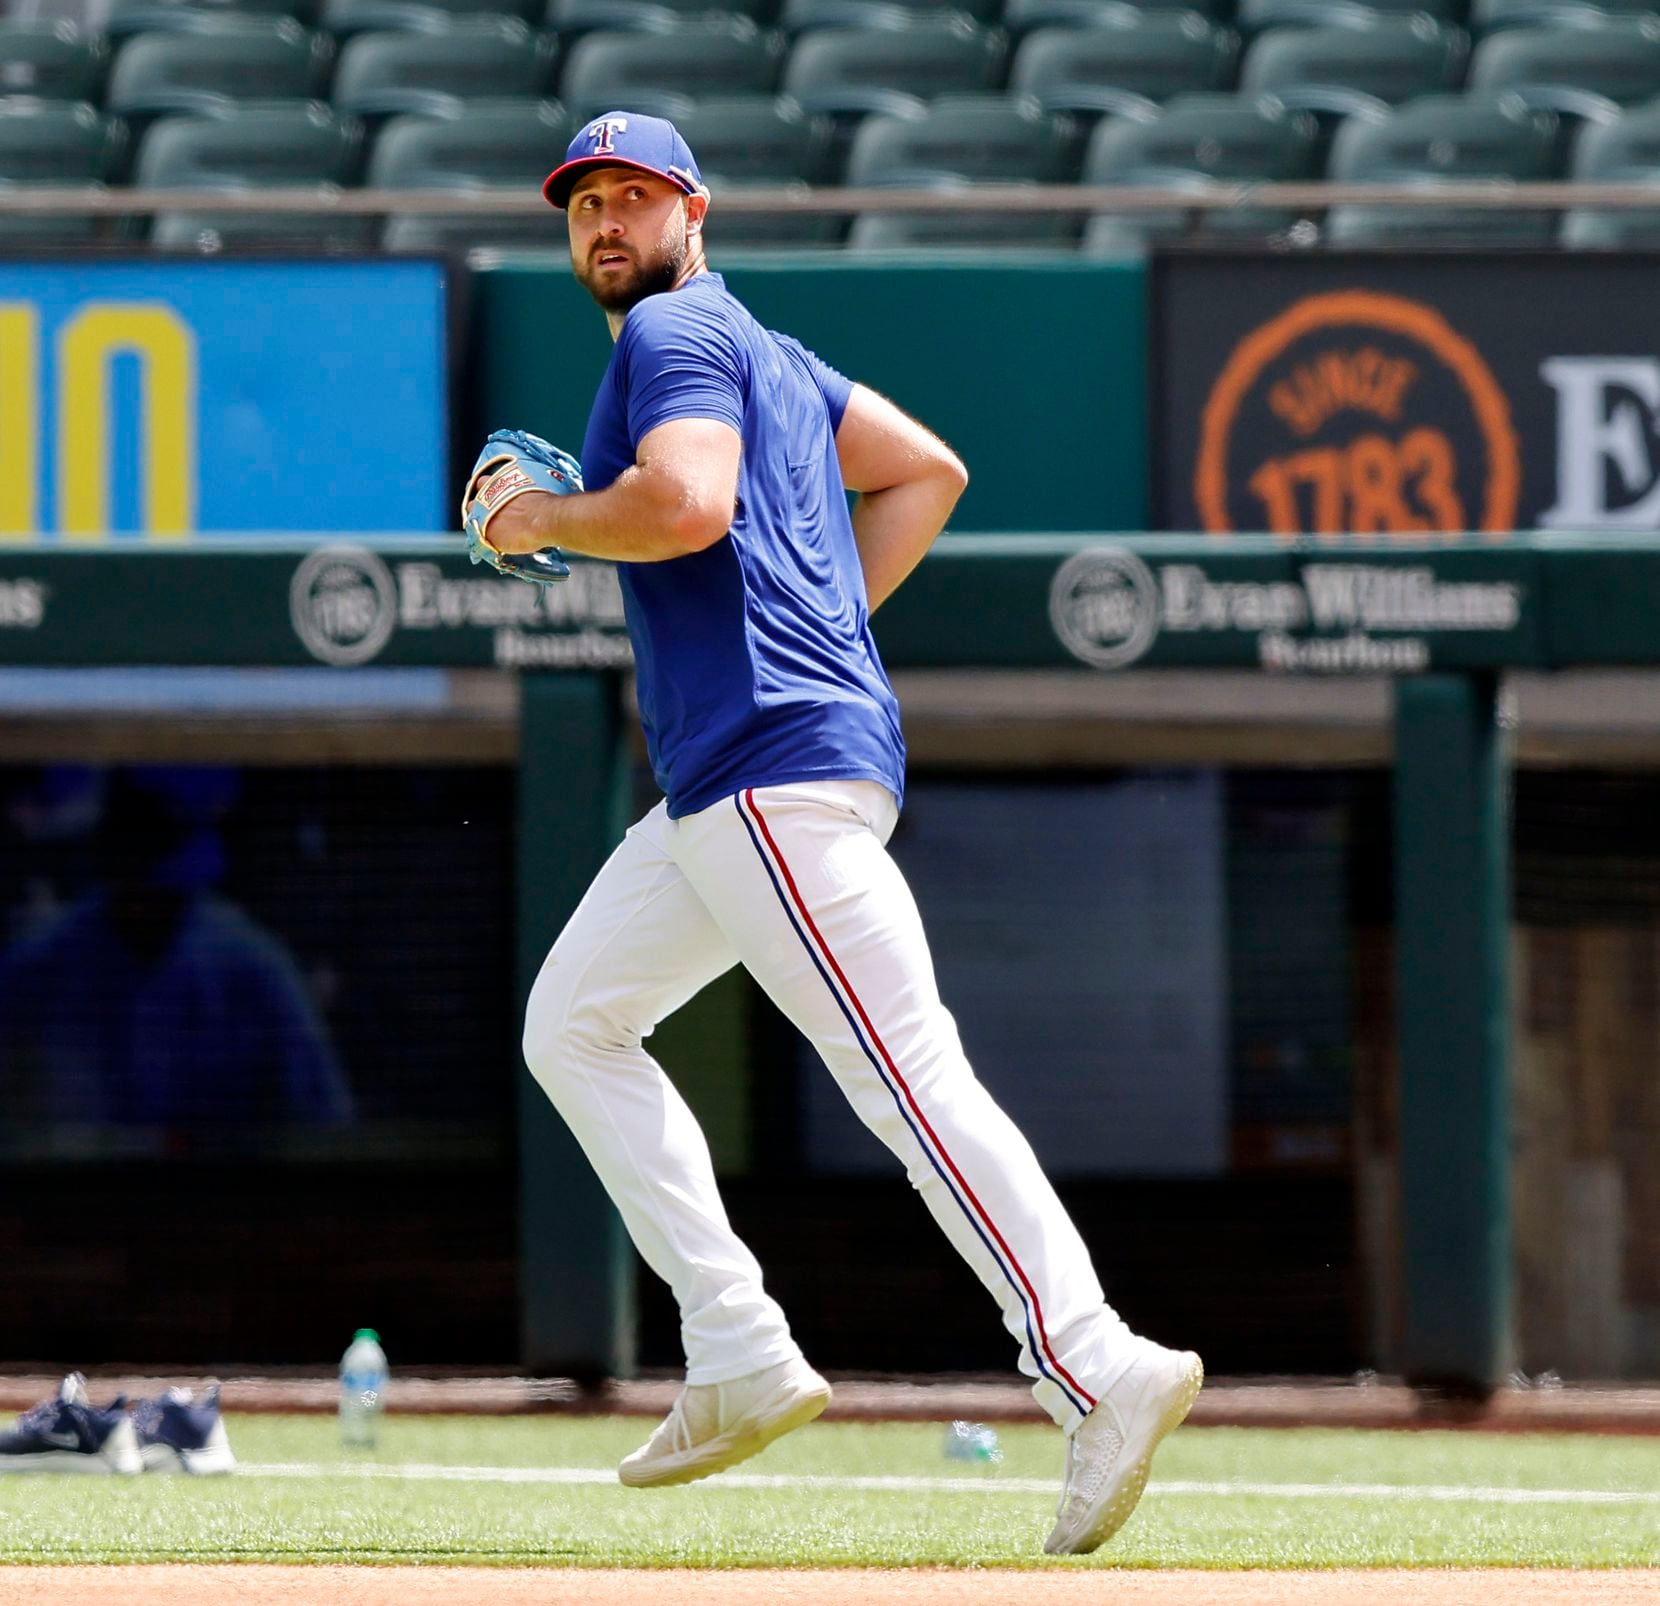 Texas Rangers Joey Gallo takes the field for batting practice before facing the Toronto Blue Jays on Opening Day at Globe Life Field in Arlington, Monday, April 5, 2021. The Rangers are facing the Toronto Blue Jays in the home opener. (Tom Fox/The Dallas Morning News)